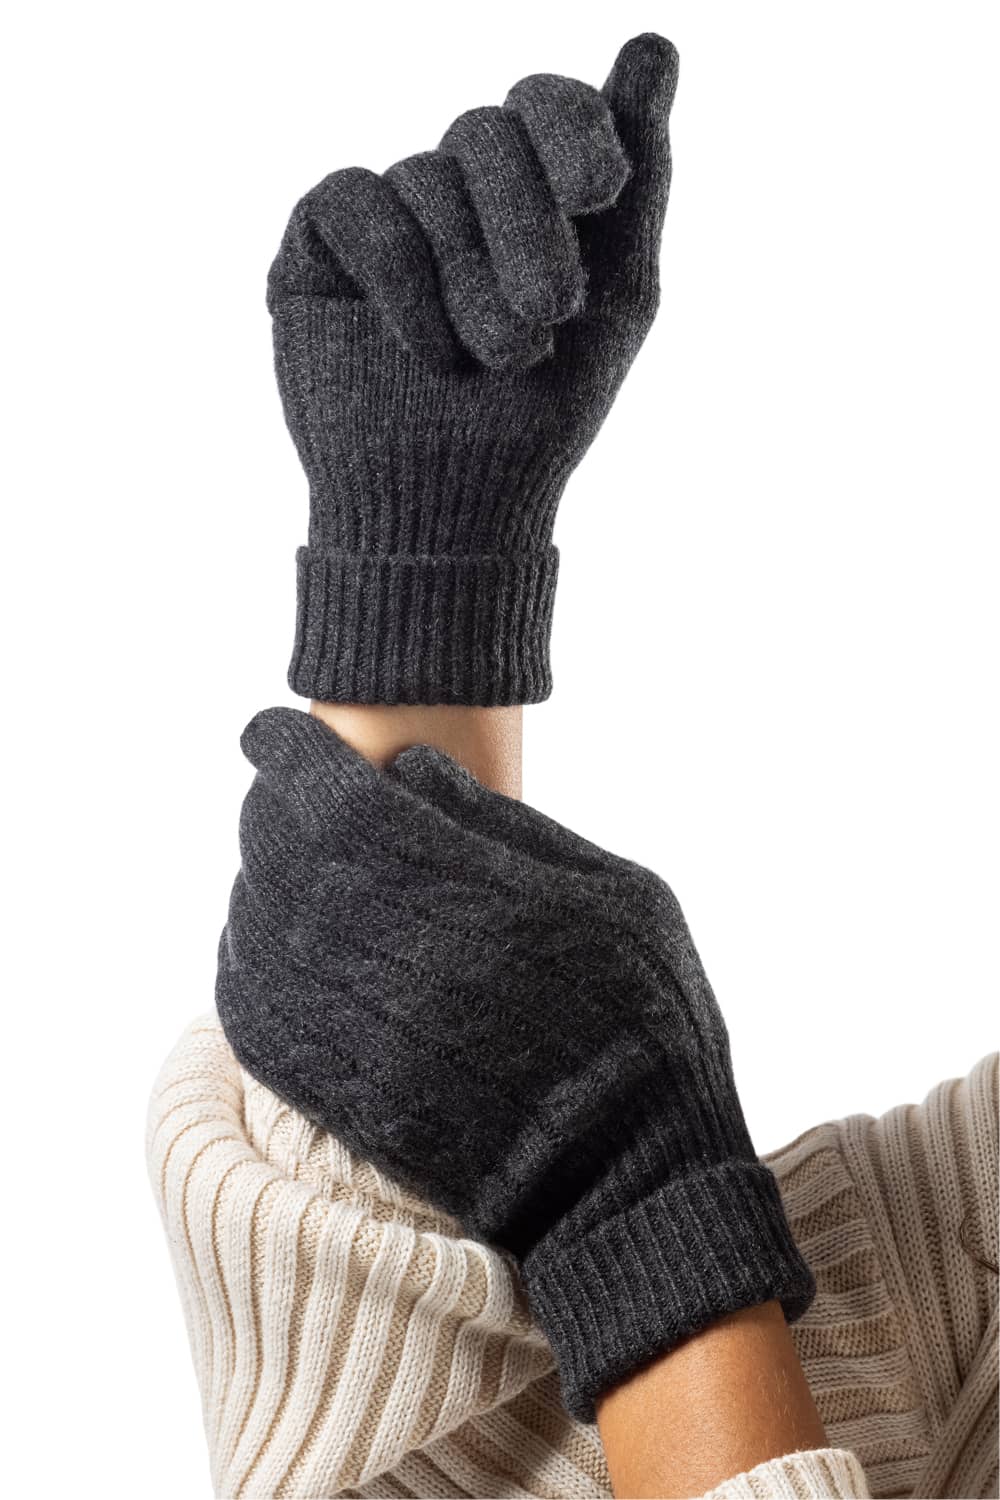 Woman's hands wearing Fishers Finery pure cashmere cable knit gloves in Charcoal Grey